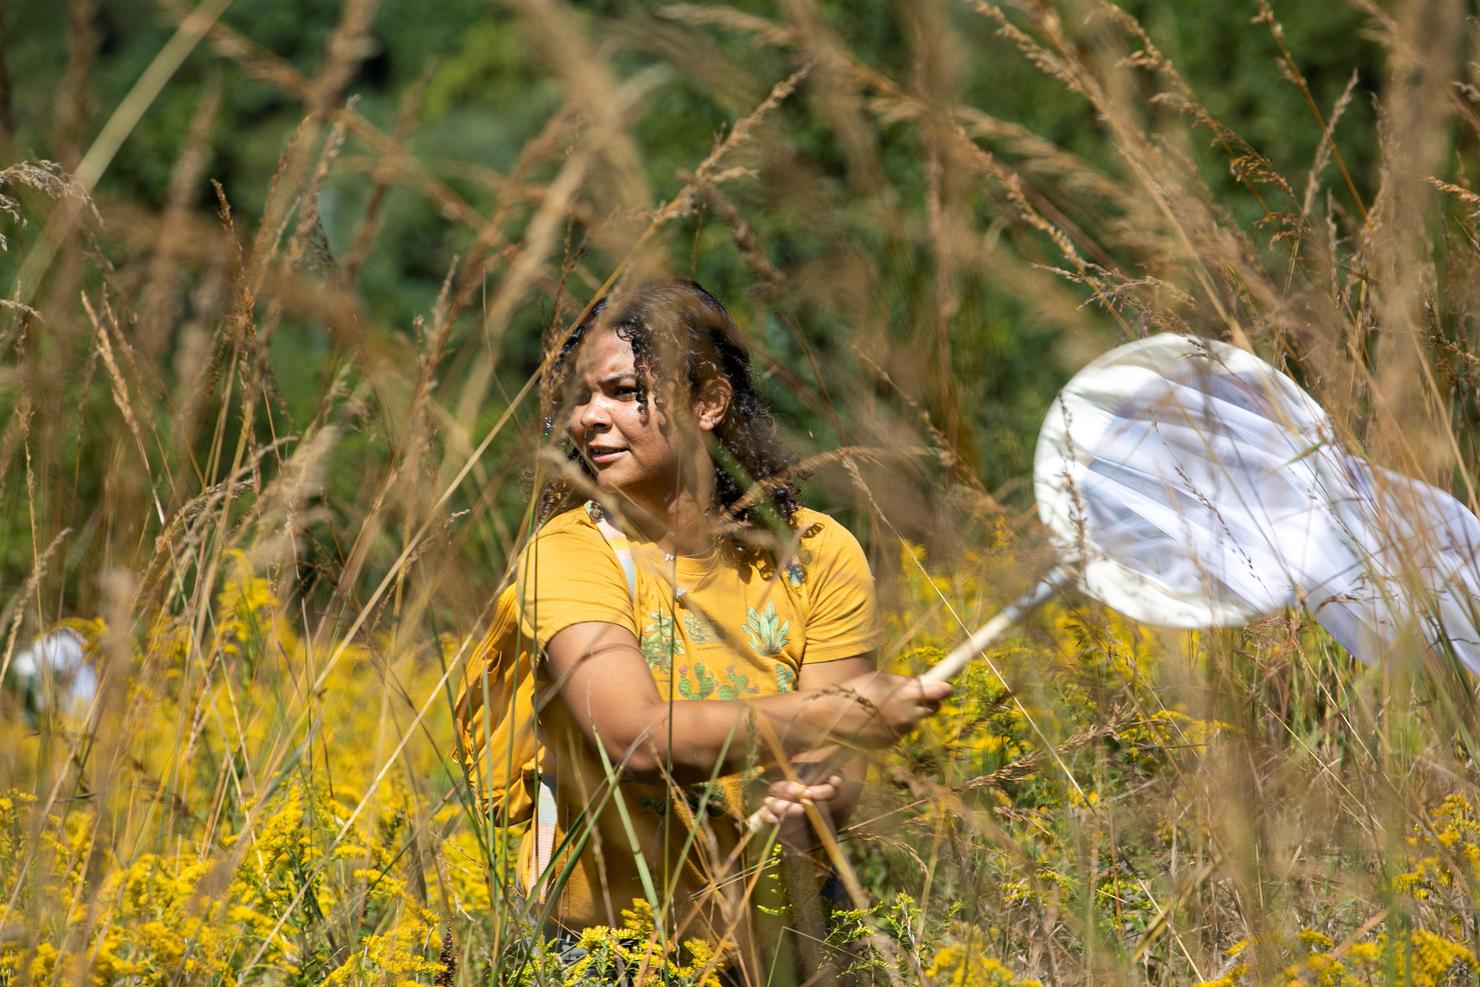 A student is seen between tall blades of grass in a field. She is holding an aerial net with both hands as she searches for monarch butterflies.